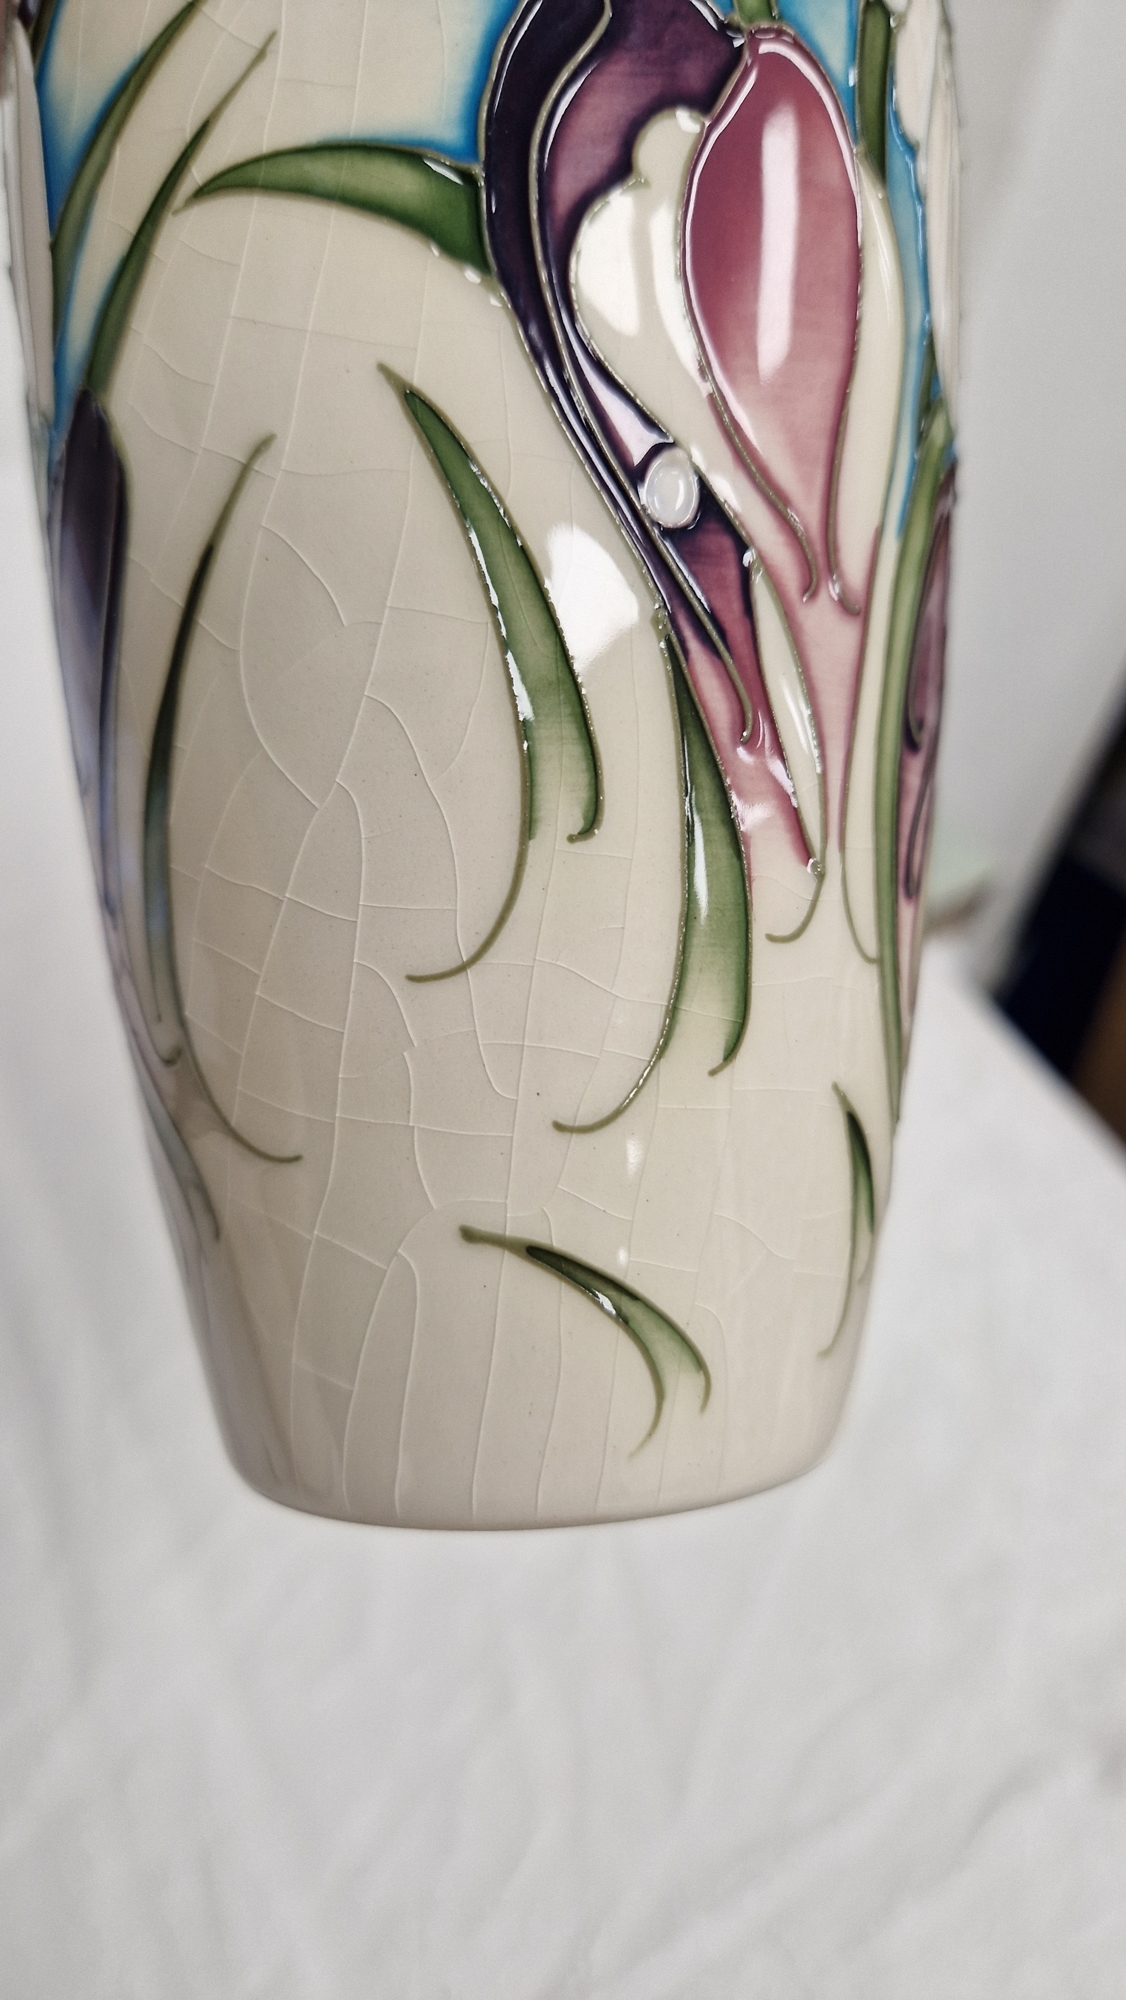 Moorcroft Snow Time pattern tapered baluster vase by Emma Bossons, printed and impressed marks, - Image 15 of 22